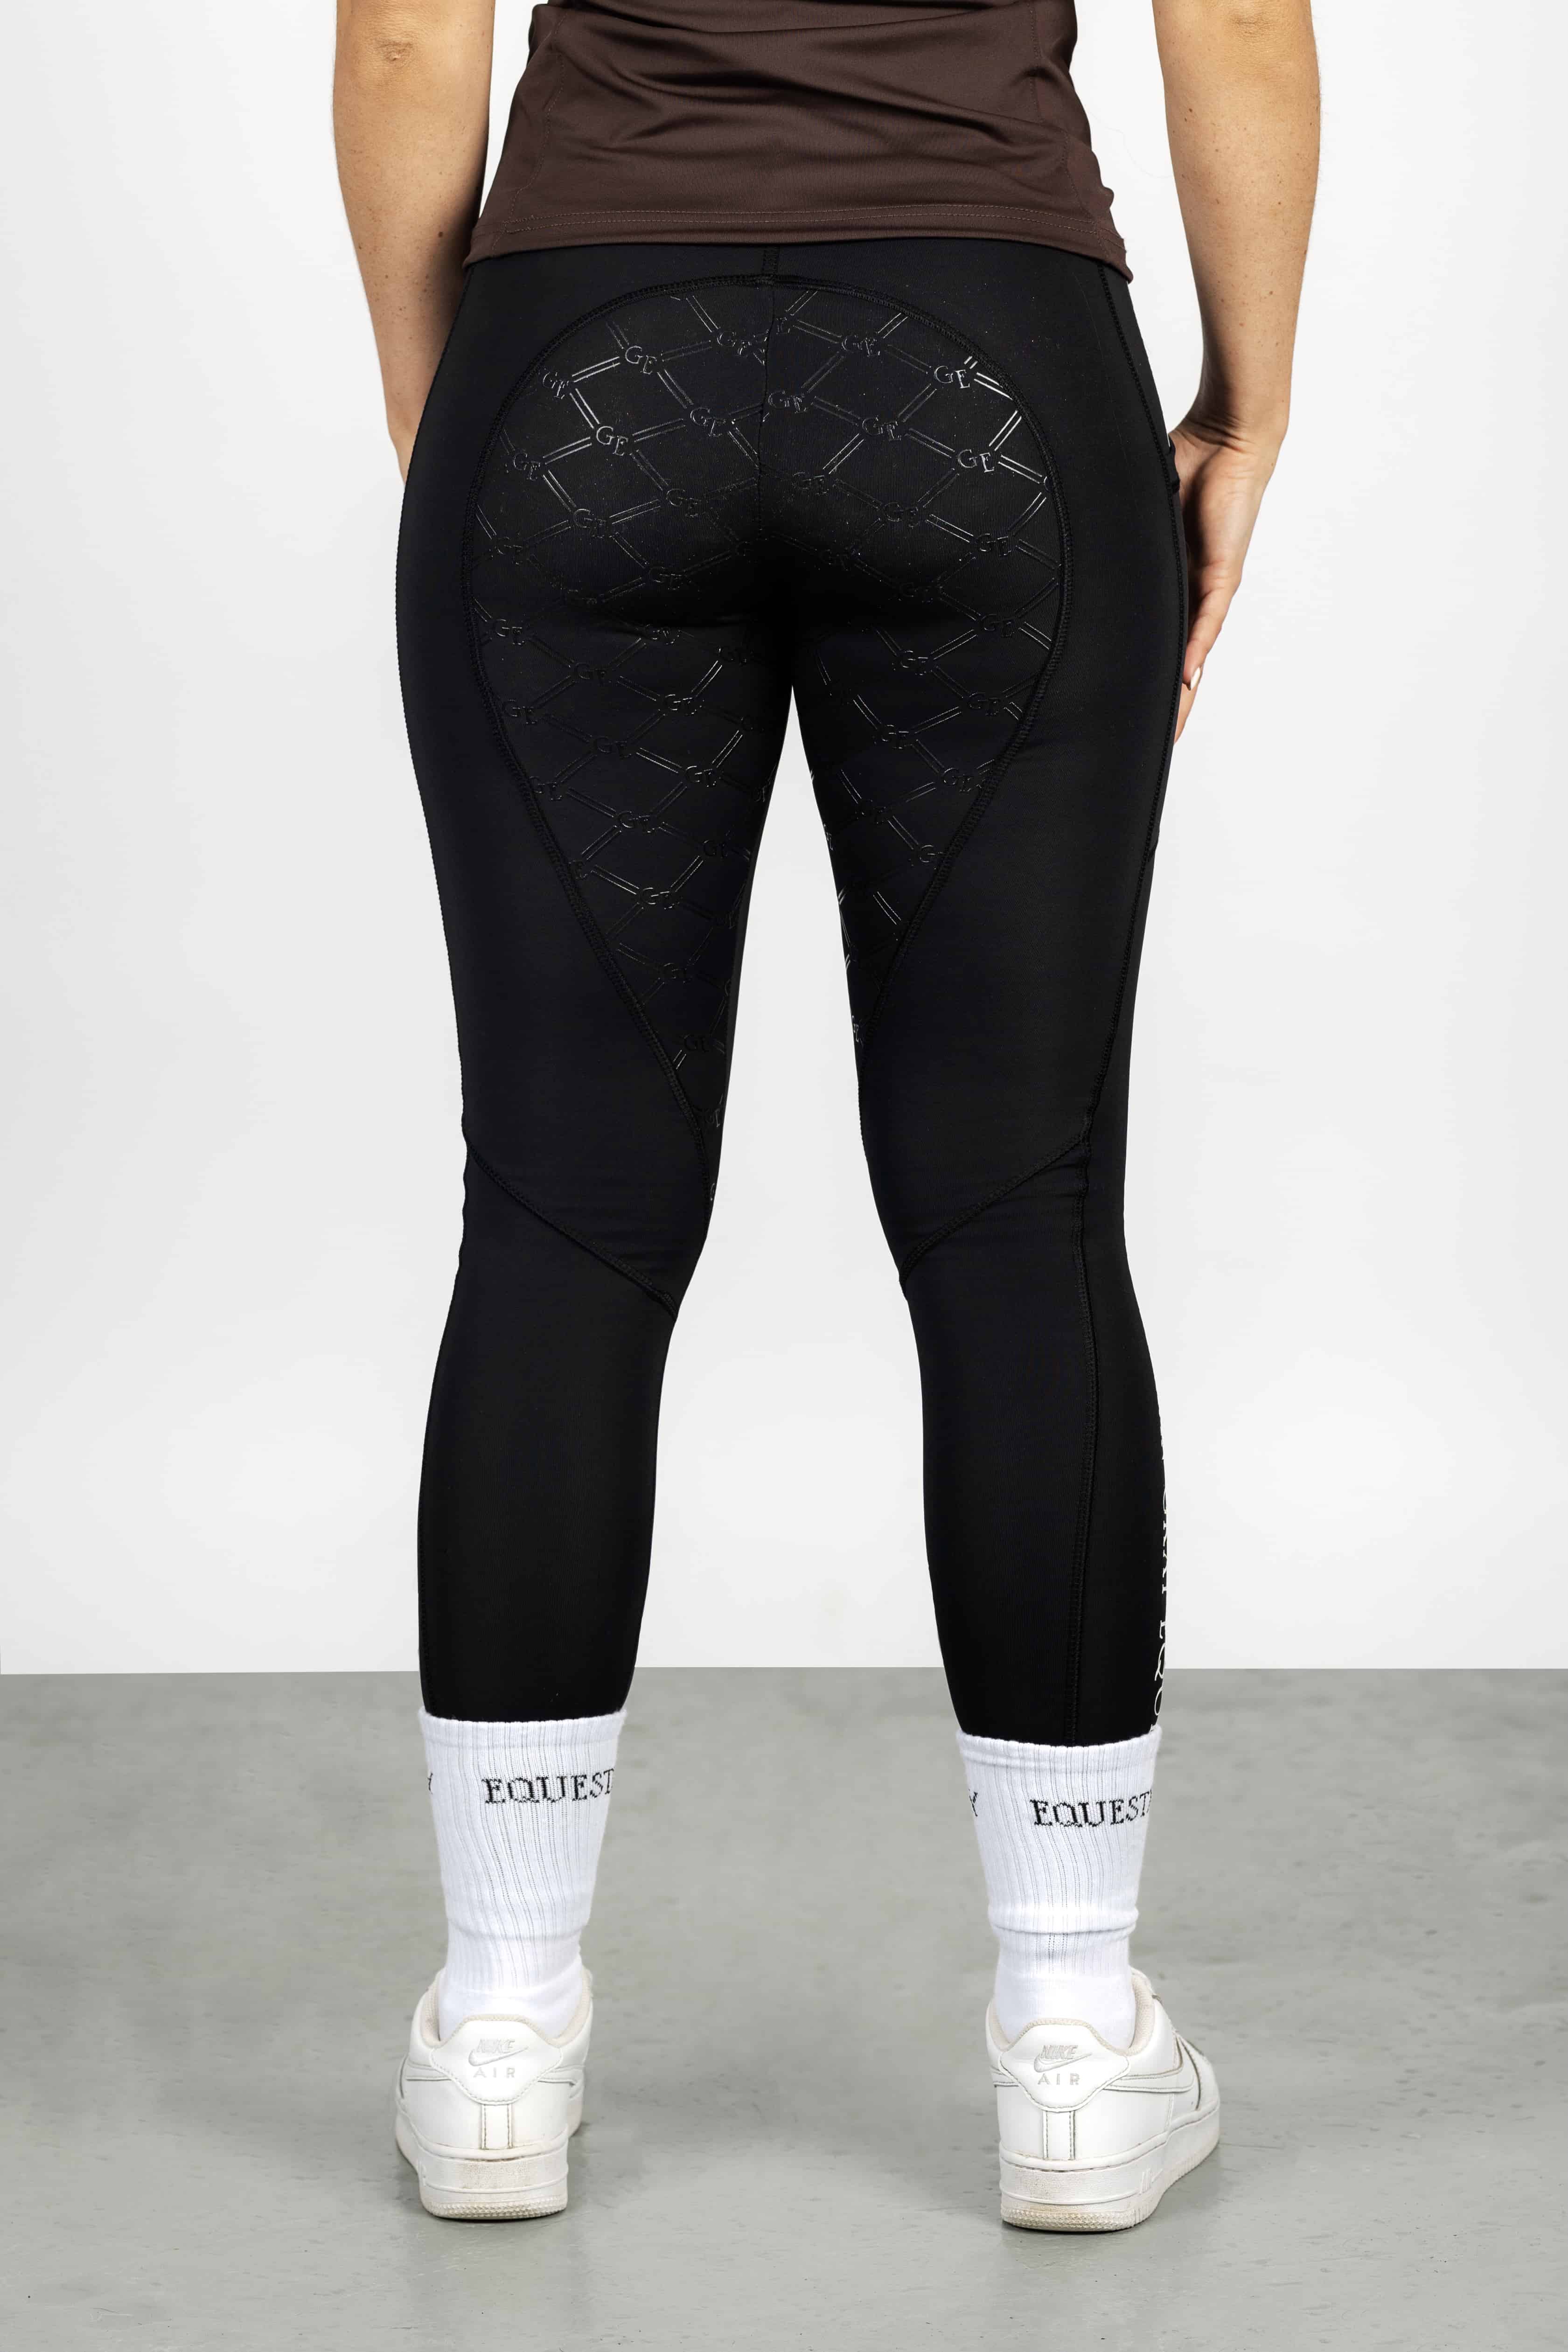 A view of the back of our black renew leggings with full non slip seat.